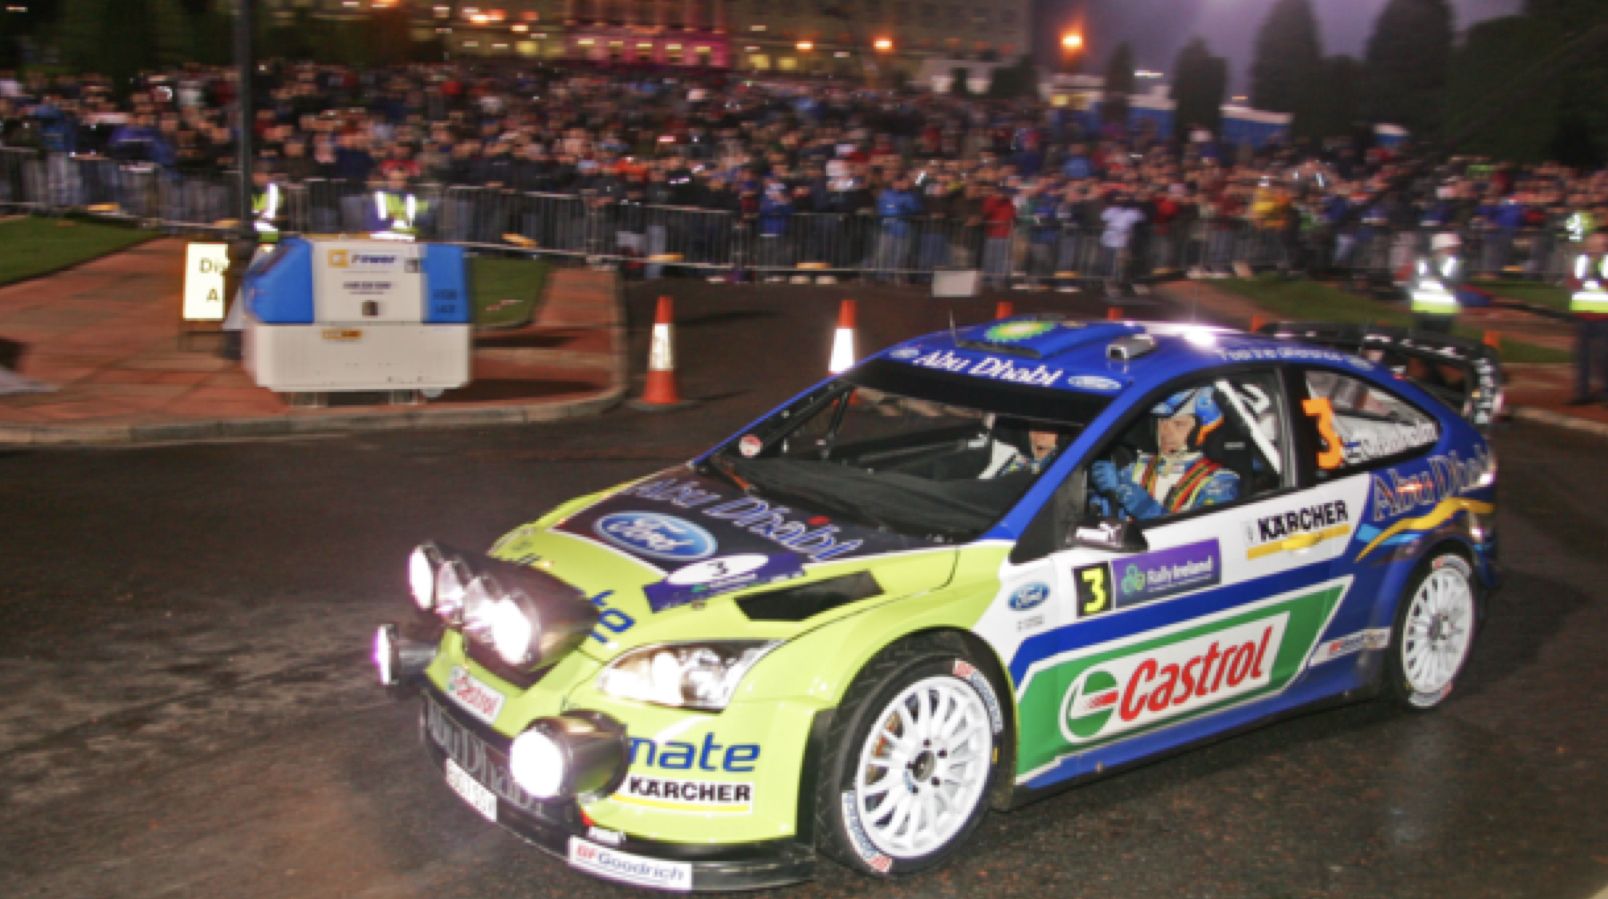 HUGE DRAW: Marcus Gronholm on the Stormont stage of Rally Ireland 2007; below, Petter Solbert signing autographs at the Stormont event, which drew massive crowds (pics courtesy of Roy Dempster)